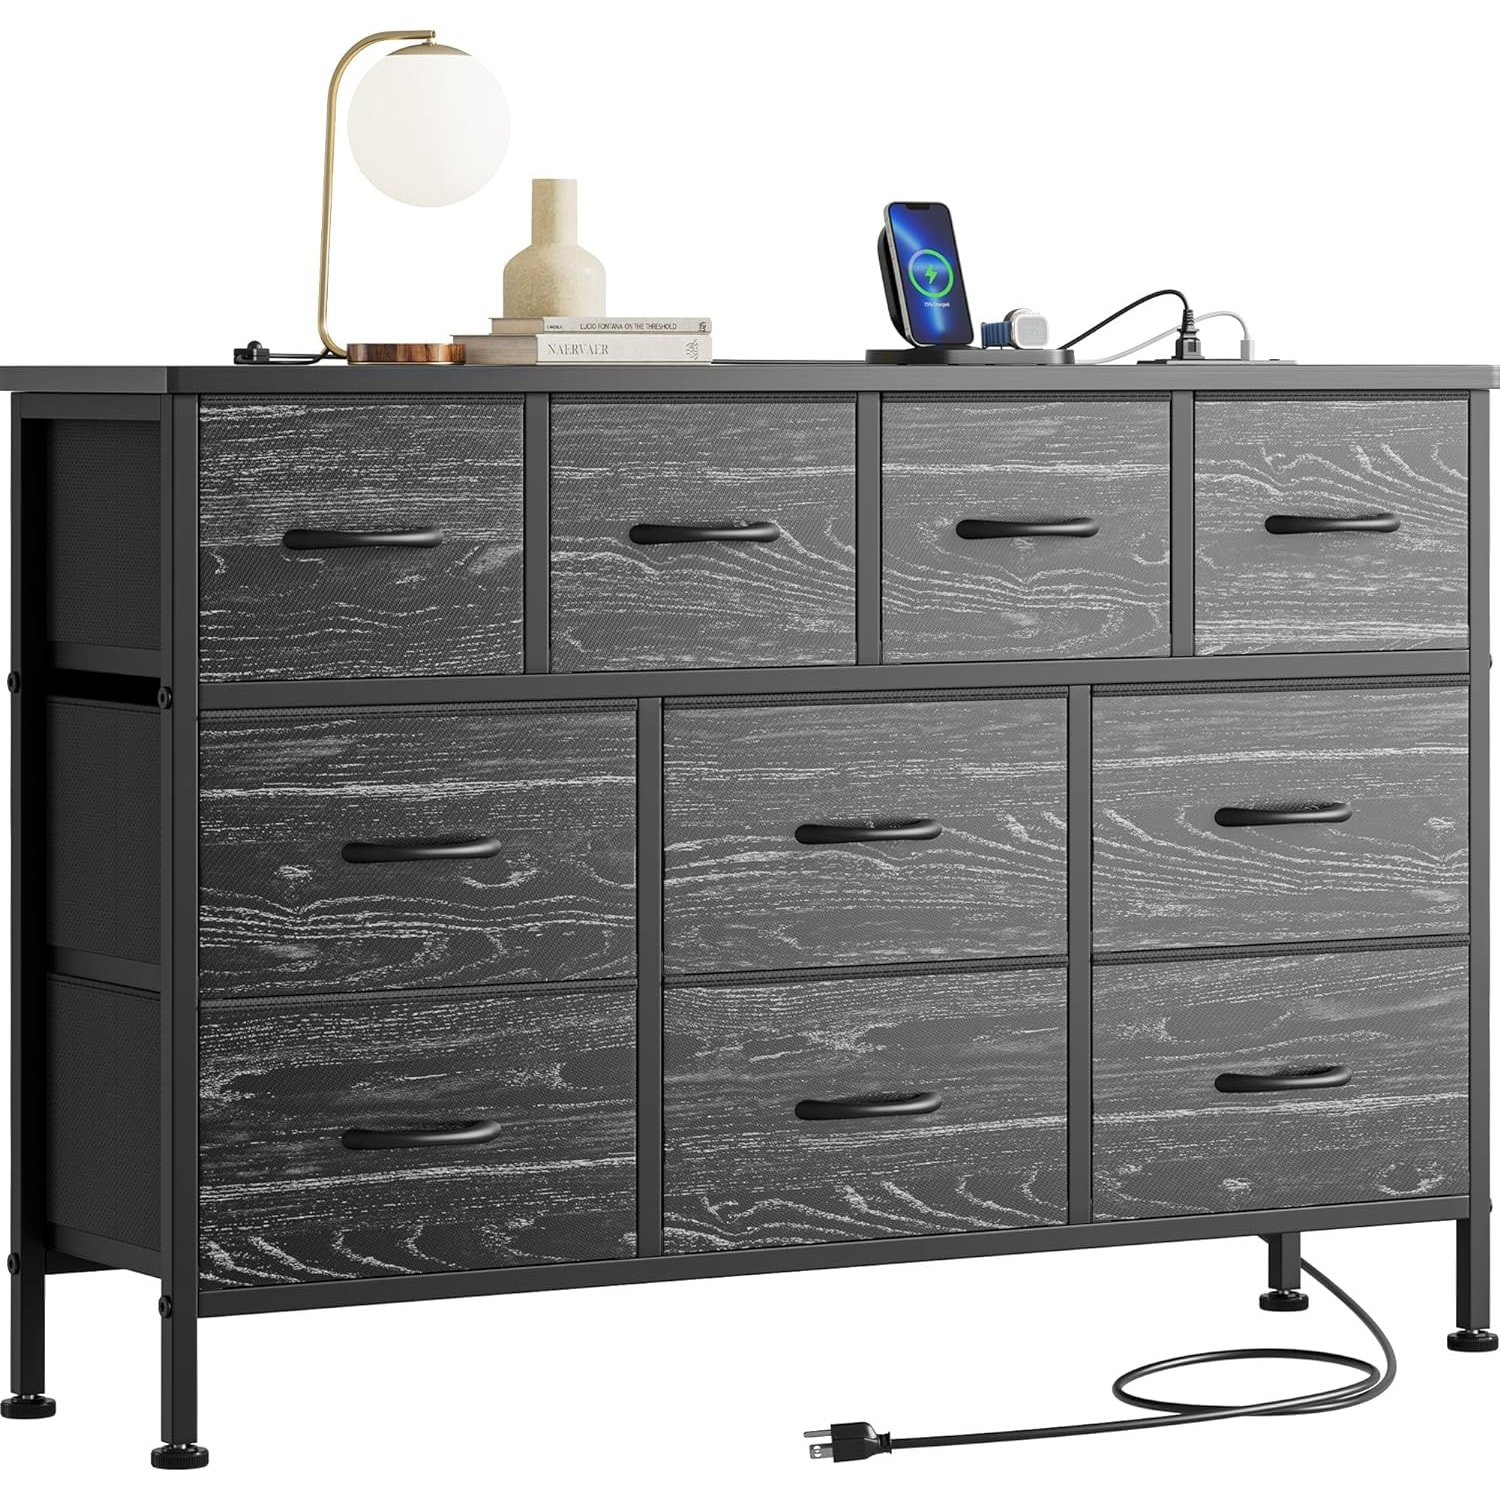 https://ak1.ostkcdn.com/images/products/is/images/direct/45ae897715d1206356d2f6504bbf5af79aa2cbd4/10-Drawer-Dresser-47%22-TV-Stand-with-Power-Outlet-Chest-of-Drawers.jpg